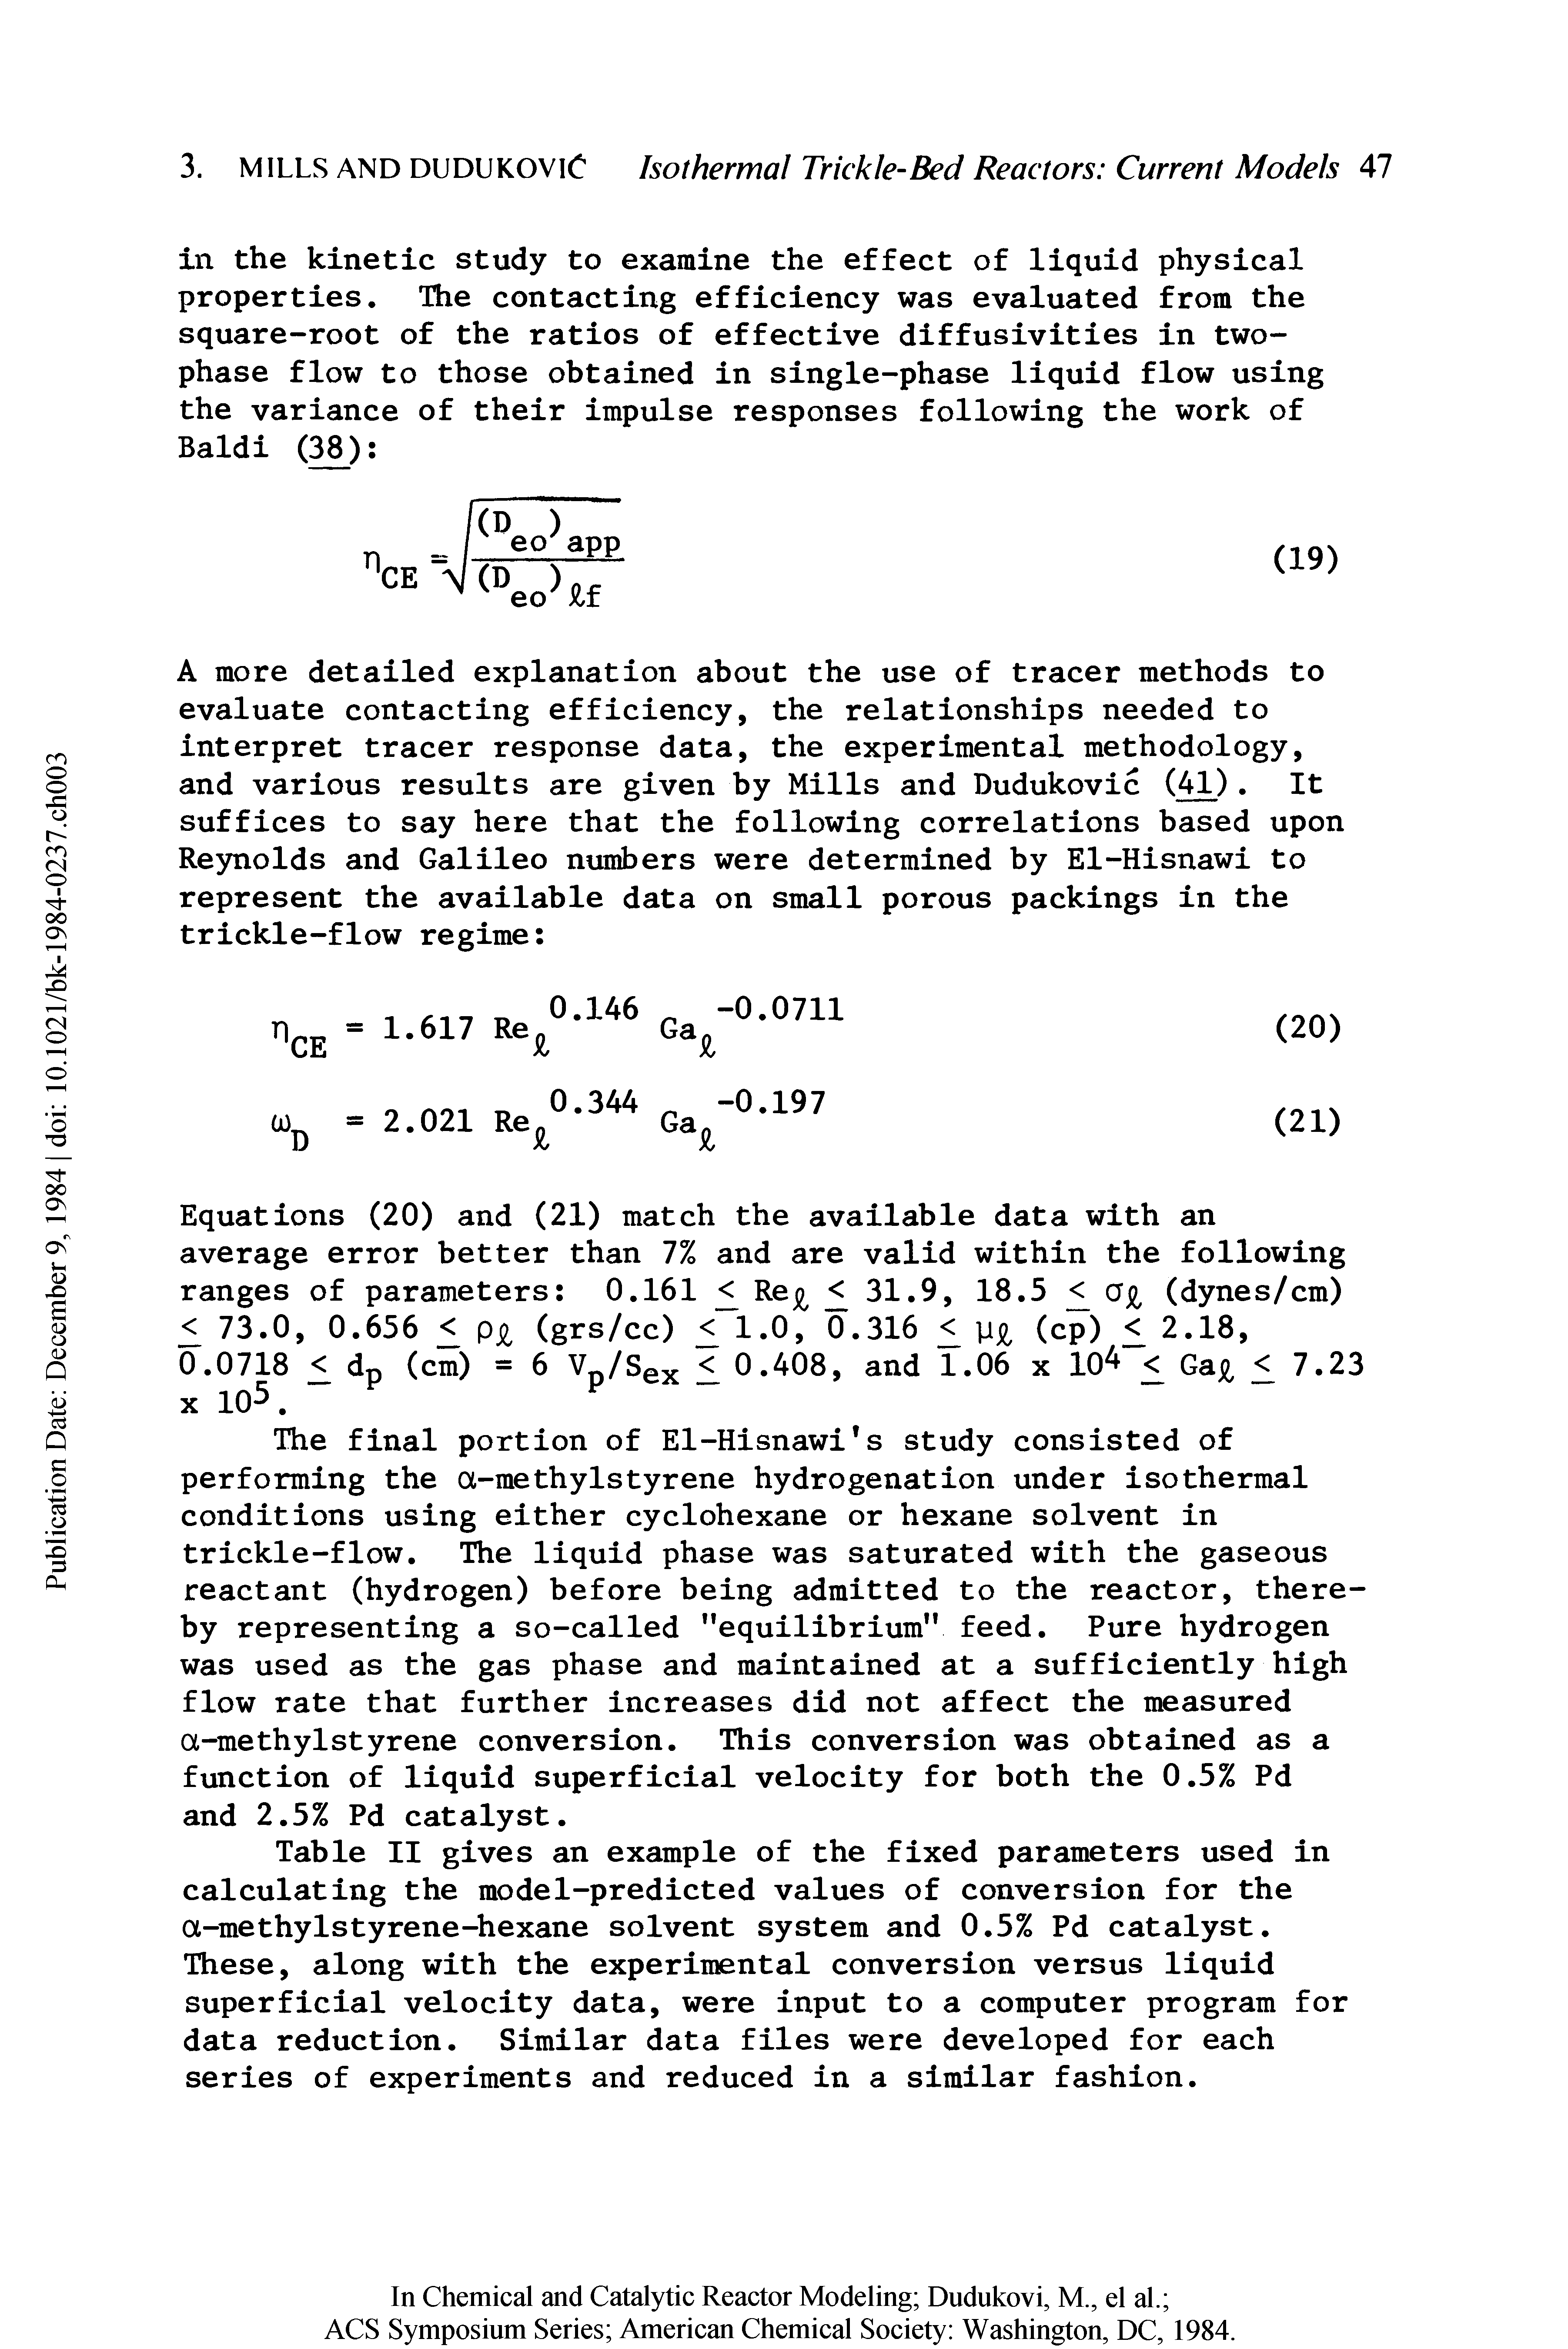 Table II gives an example of the fixed parameters used in calculating the model-predicted values of conversion for the a-methylstyrene-hexane solvent system and 0.5% Pd catalyst. These, along with the experimental conversion versus liquid superficial velocity data, were input to a computer program for data reduction. Similar data files were developed for each series of experiments and reduced in a similar fashion.